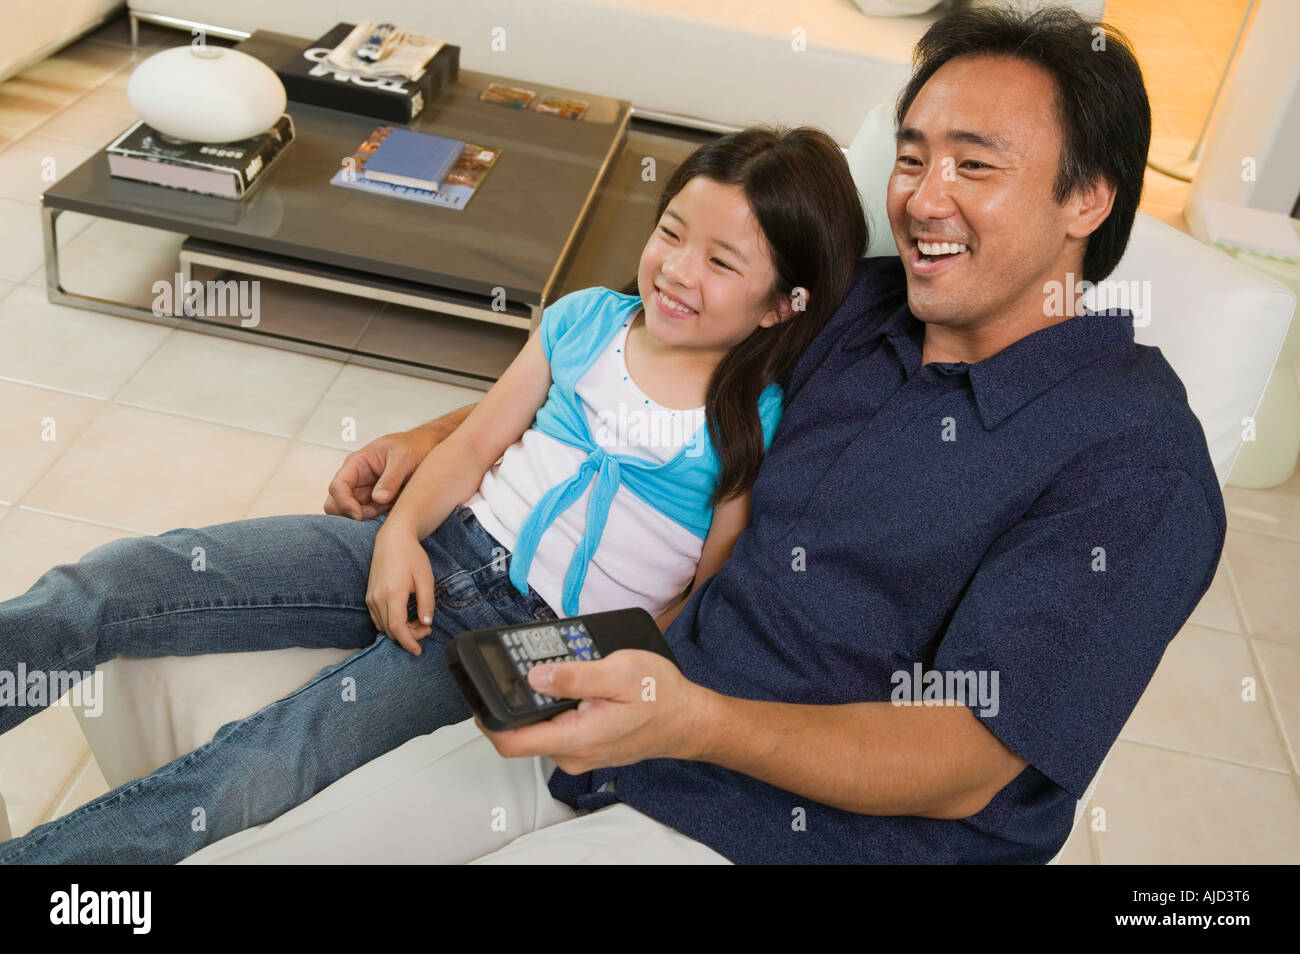 Father and Daughter Watching TV Together in living room, high angle view Stock Photo